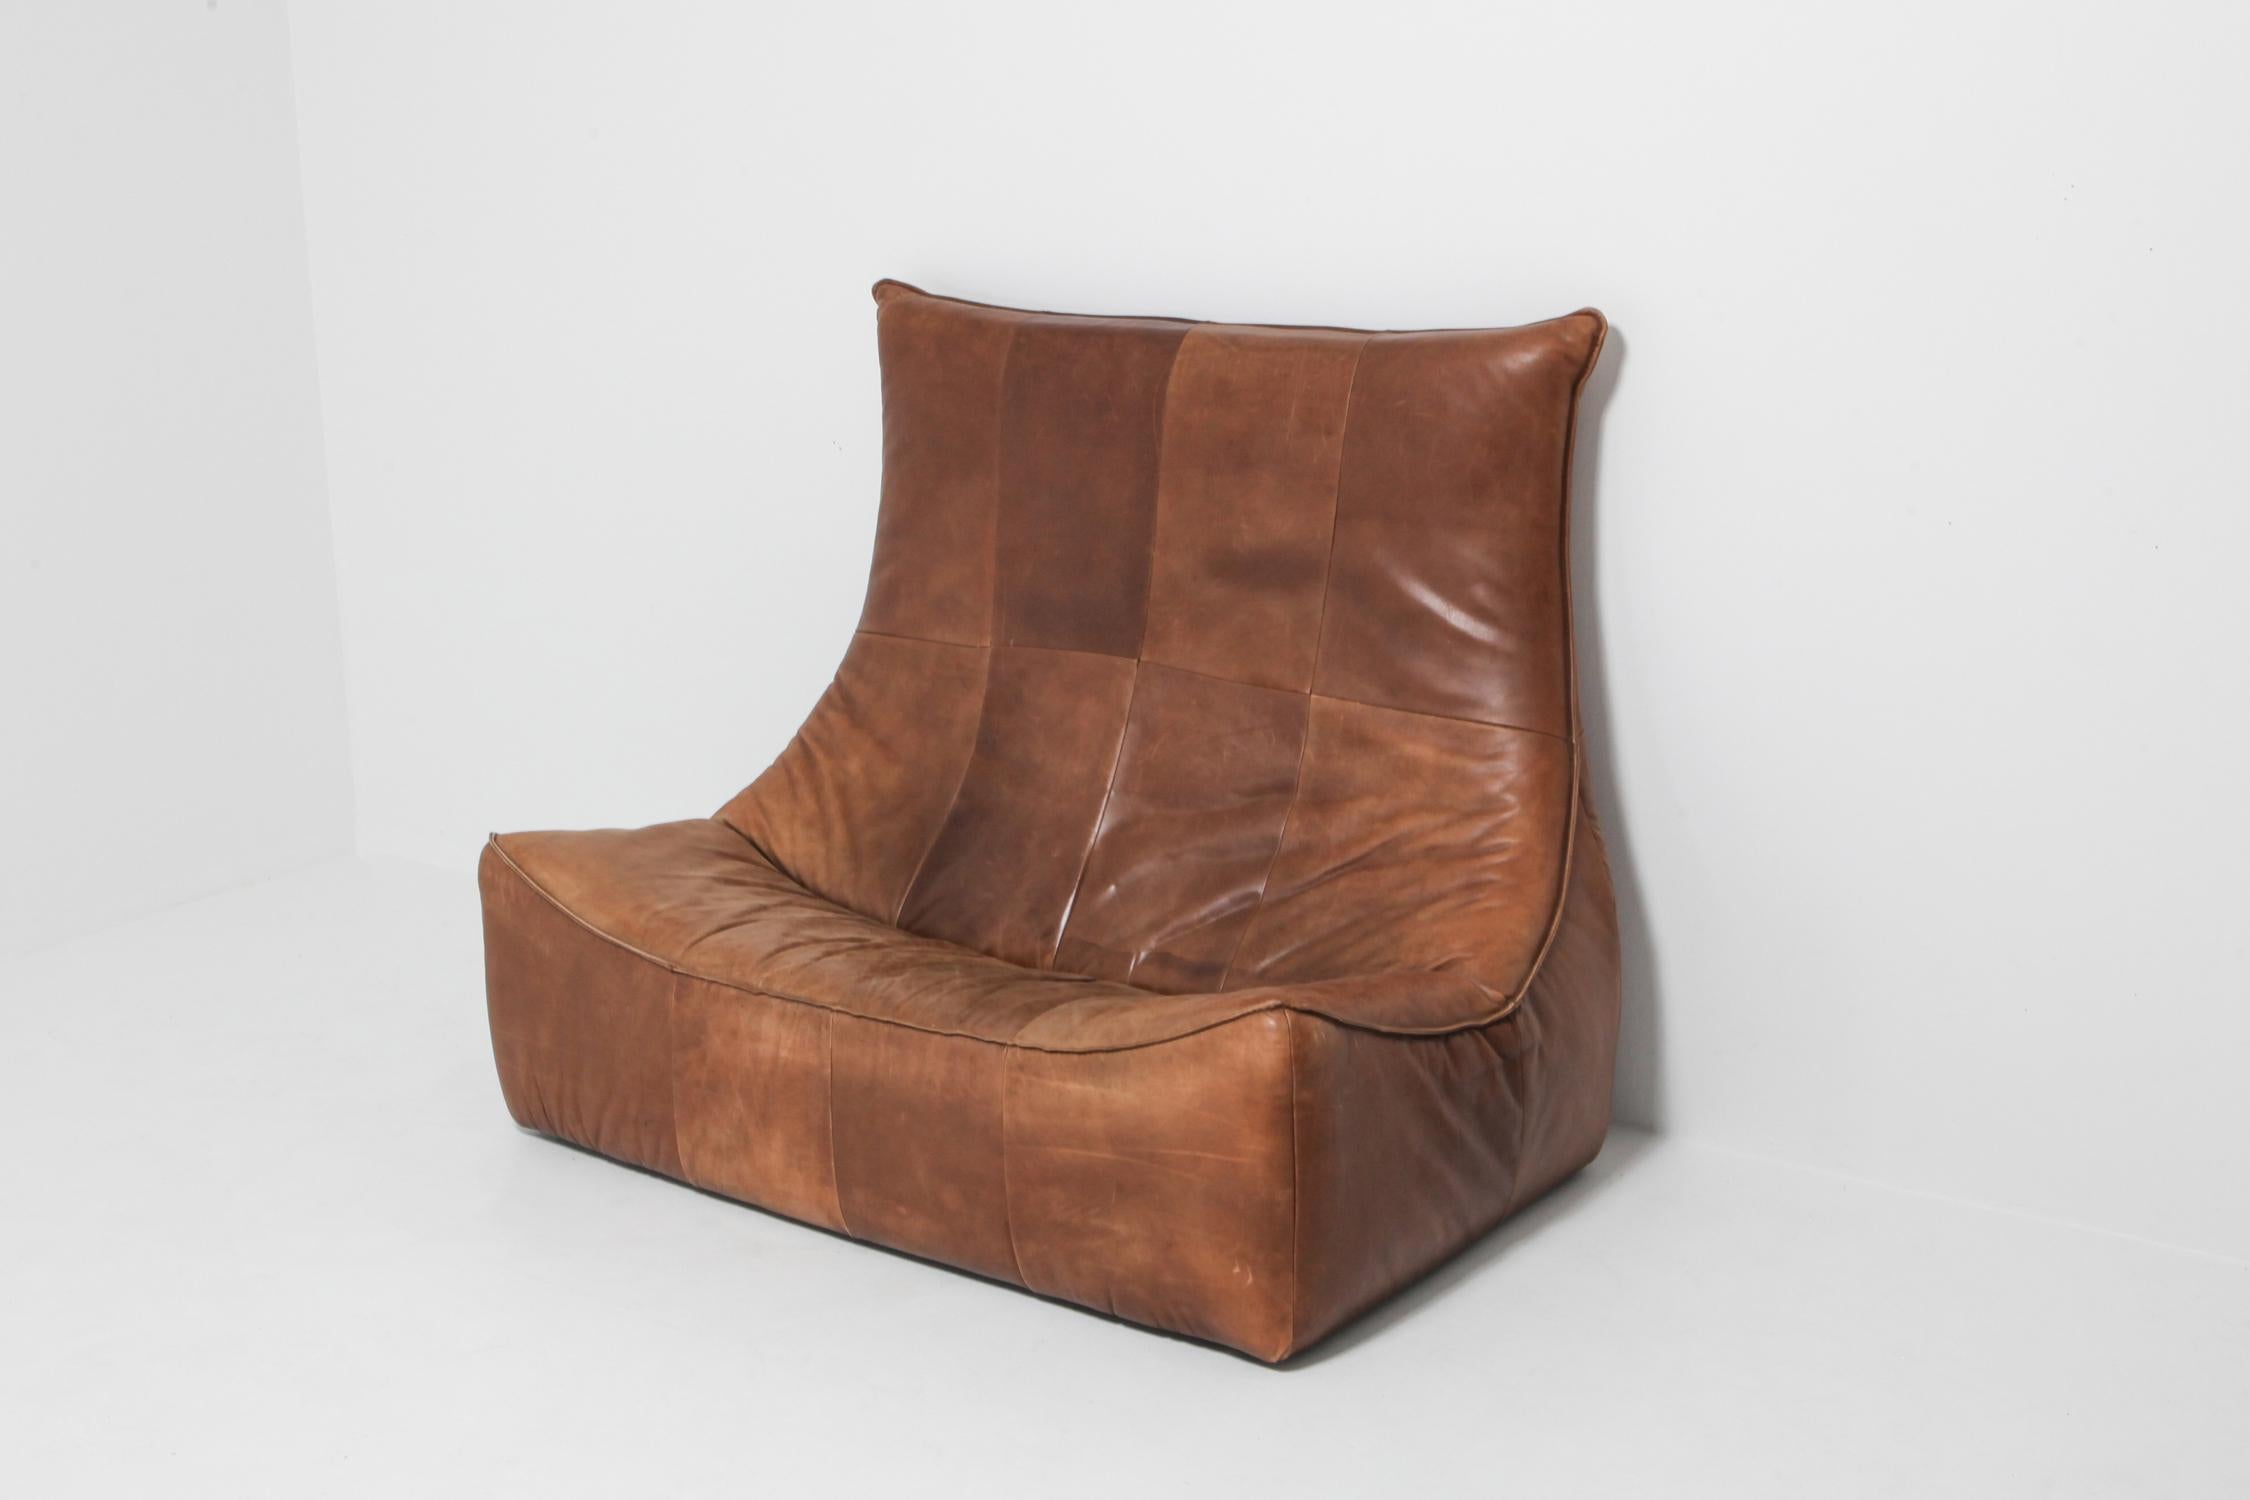 Mid-Century Modern luxury leather vintage high back couch.
It's magnificent design let's the piece act as a room divider or screen at the same time as being a sofa.
Made for Montis, The Netherlands, 1970s
Gorgeous patina on the brown leather